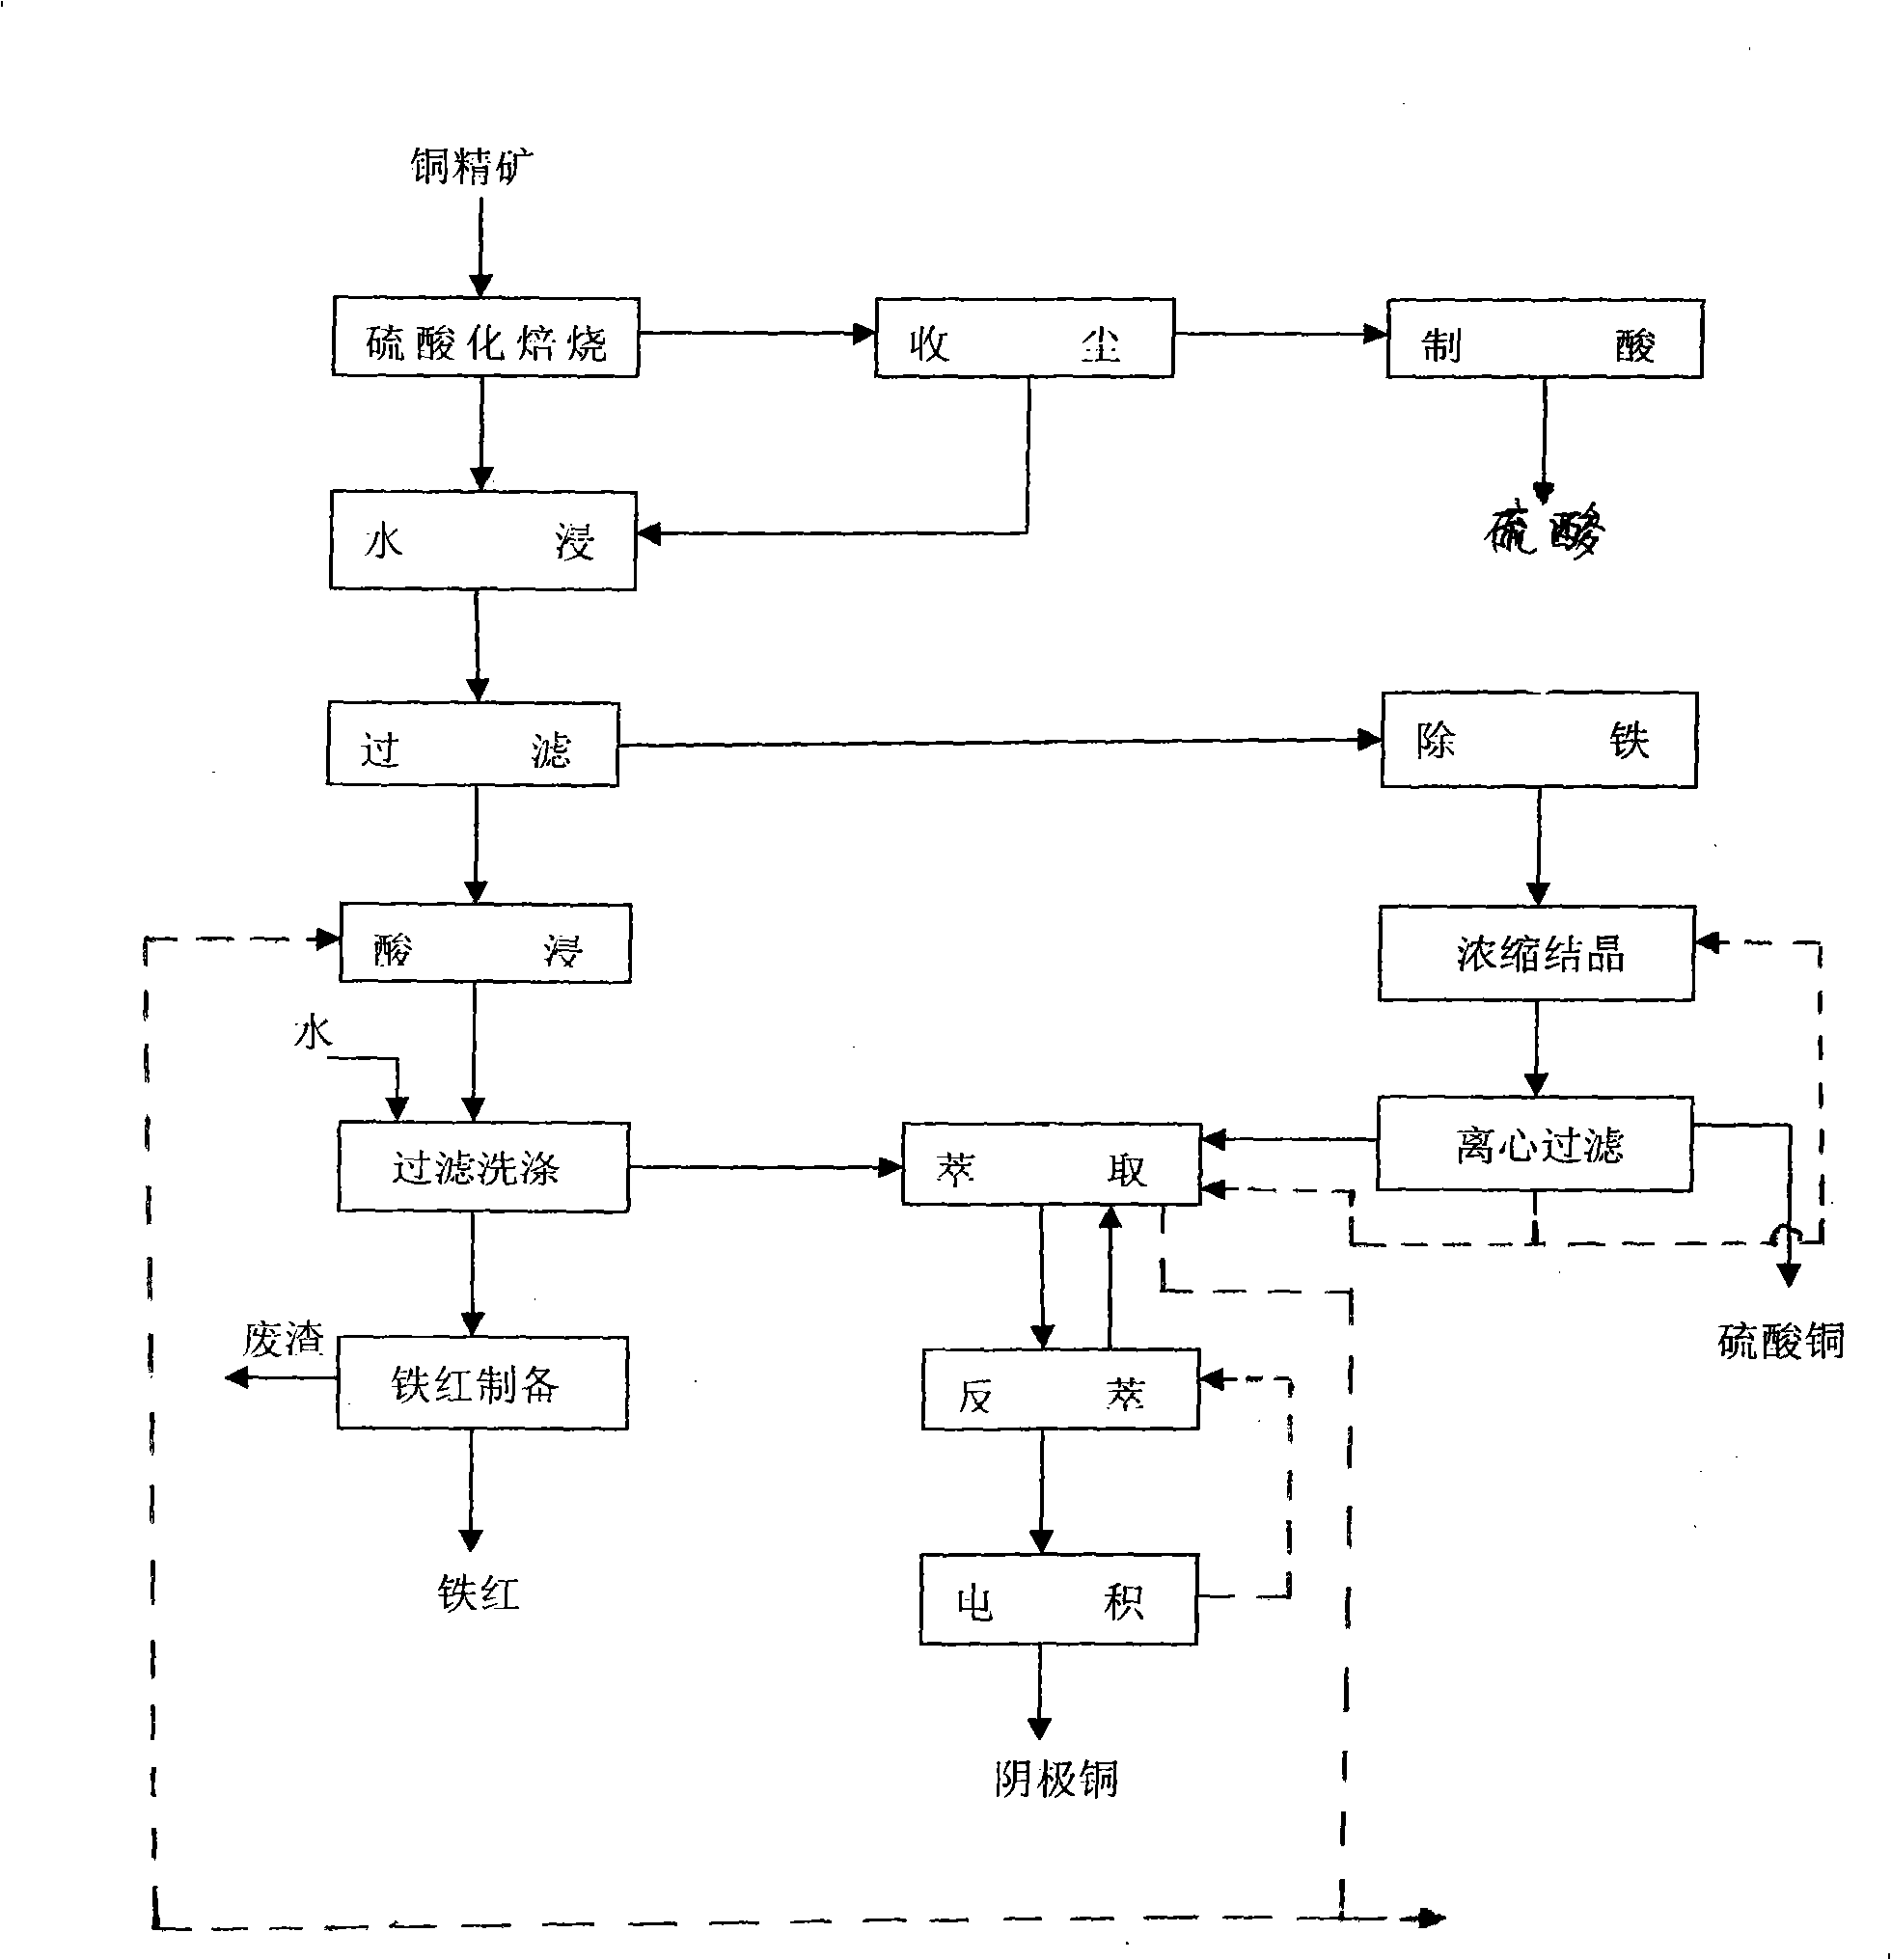 Method for directly preparing copper sulfate and cathode copper from copper ore concentrate